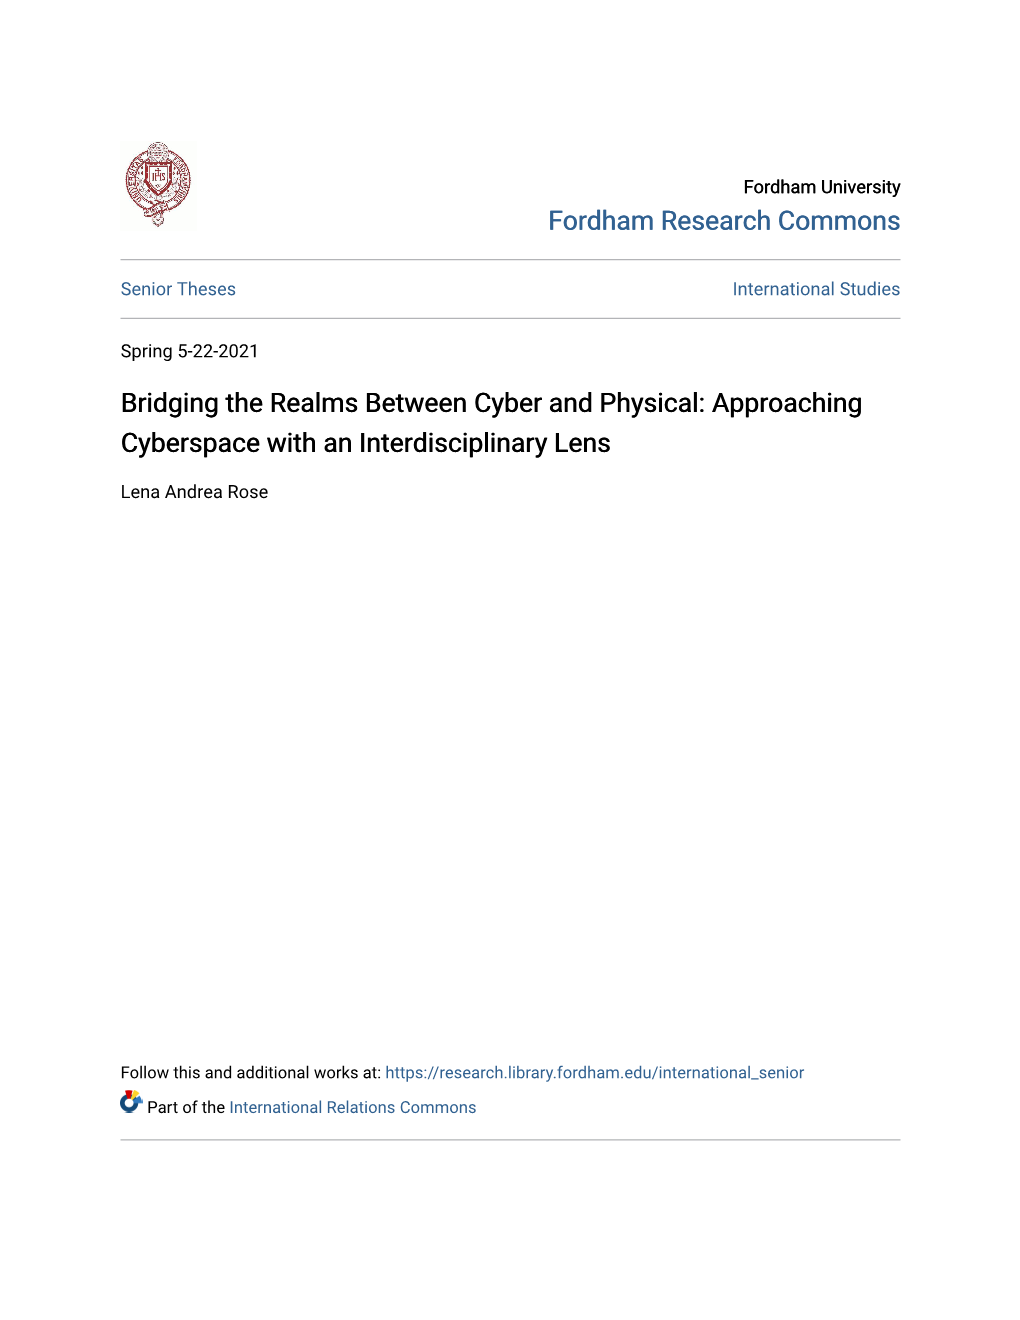 Bridging the Realms Between Cyber and Physical: Approaching Cyberspace with an Interdisciplinary Lens